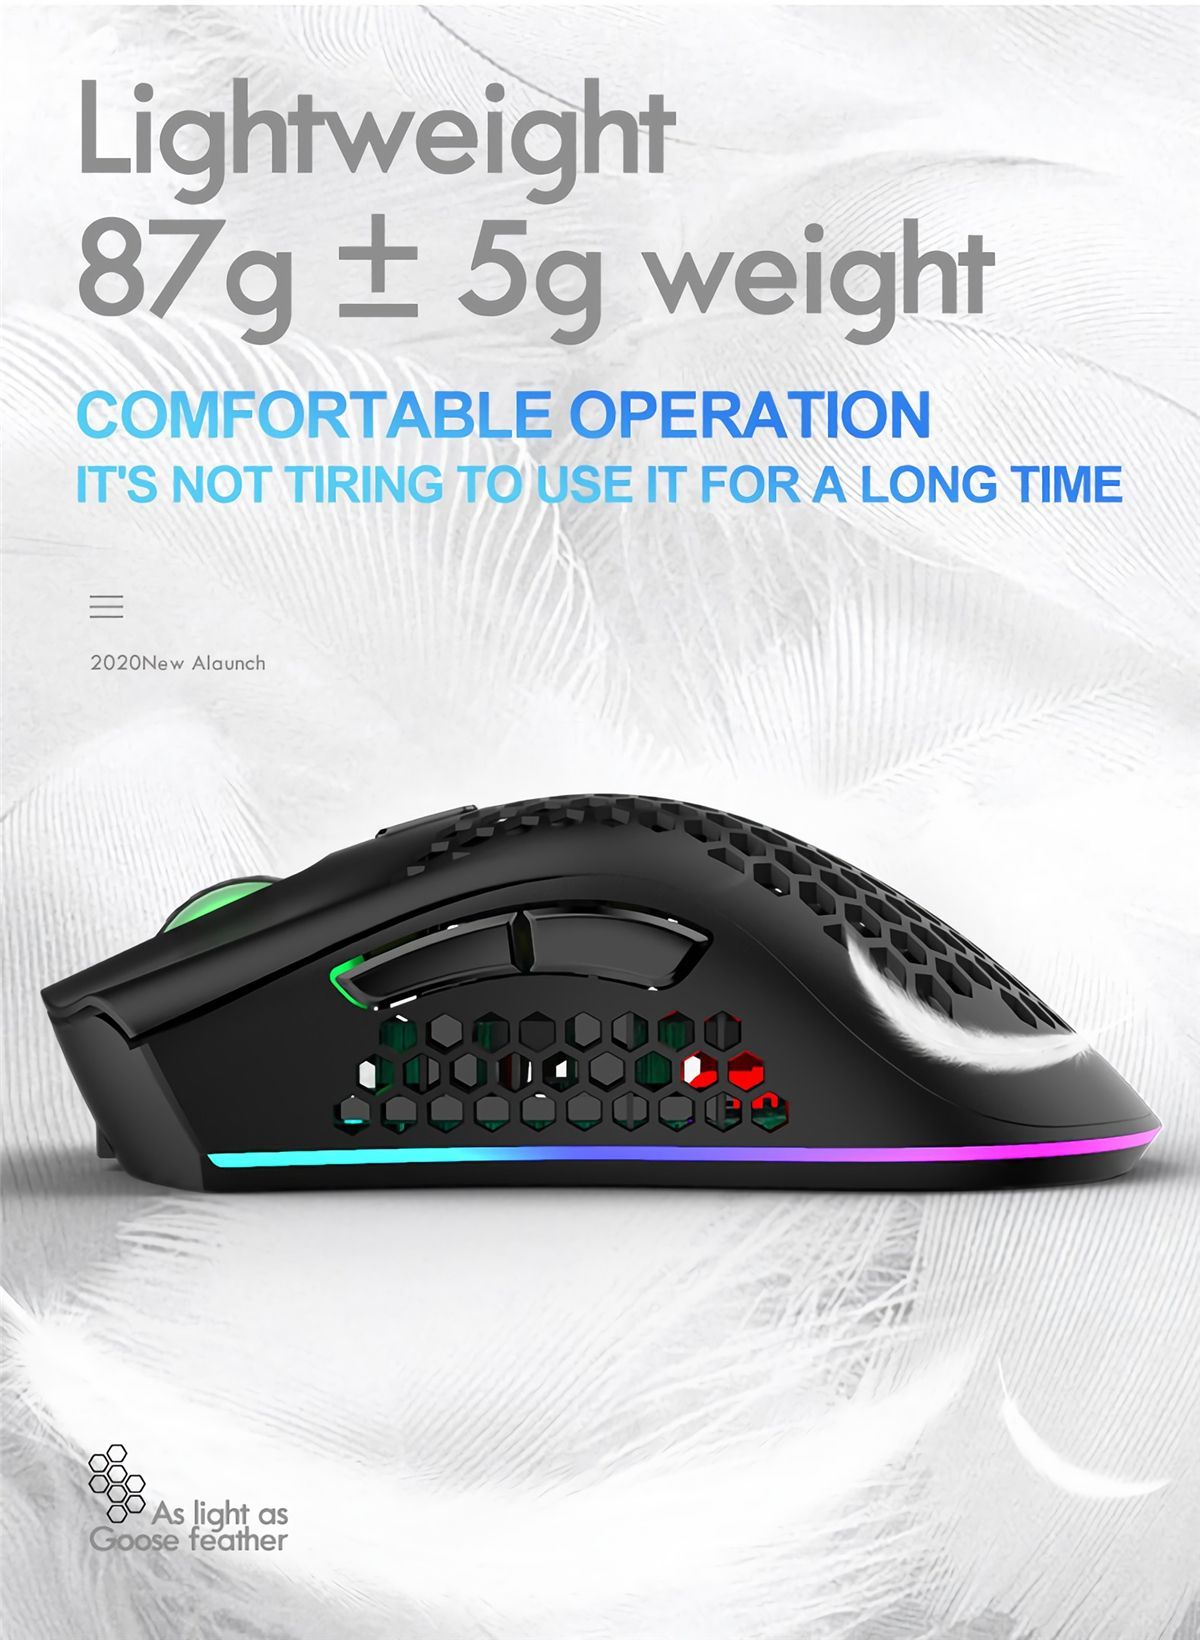 Free-wolf-X3-24G-Wireless-Rechargeable-Mouse-Hollow-Honeycomb-2400DPI-7-Buttons-Ergonomic-RGB-Optica-1738303